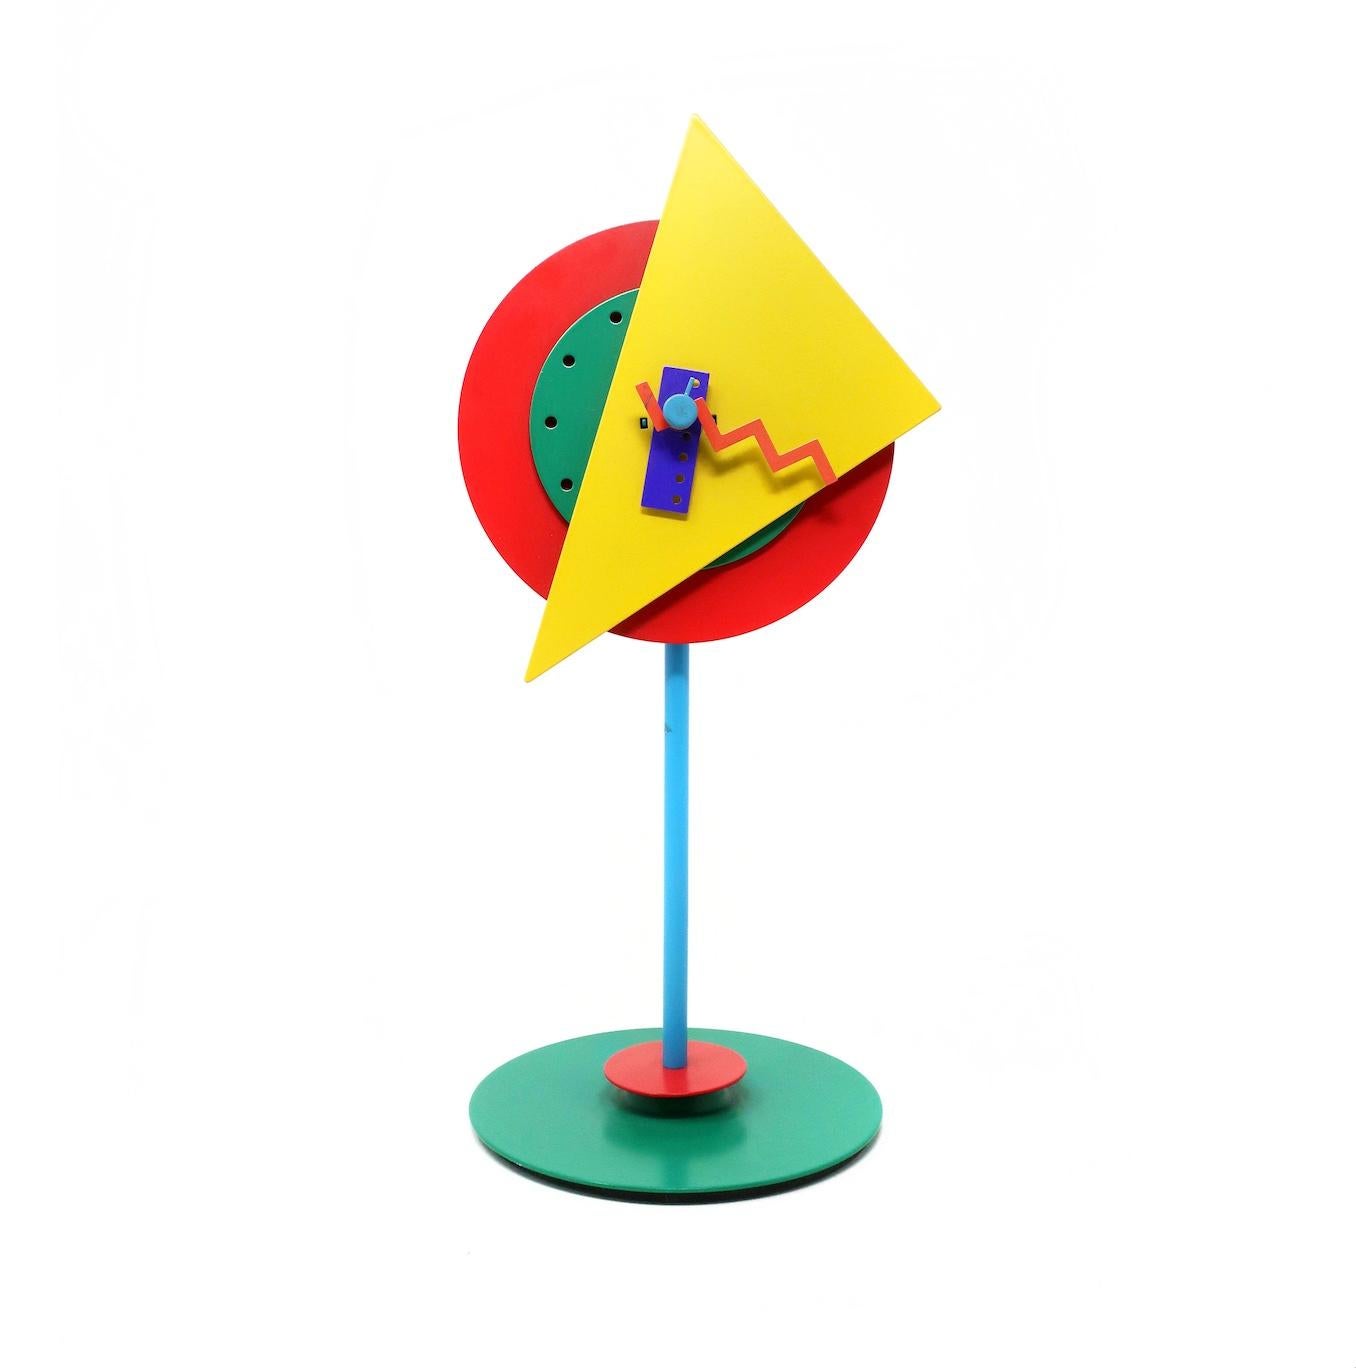 In keeping with Memphis Group-inspired designs of the 1980s, this whimsical desk or table clock use bright colors, geometric shapes, and contrast to unconventional and bold effect. Designed by Shohei Mihara for Wakita (a leading Japanese postmodern